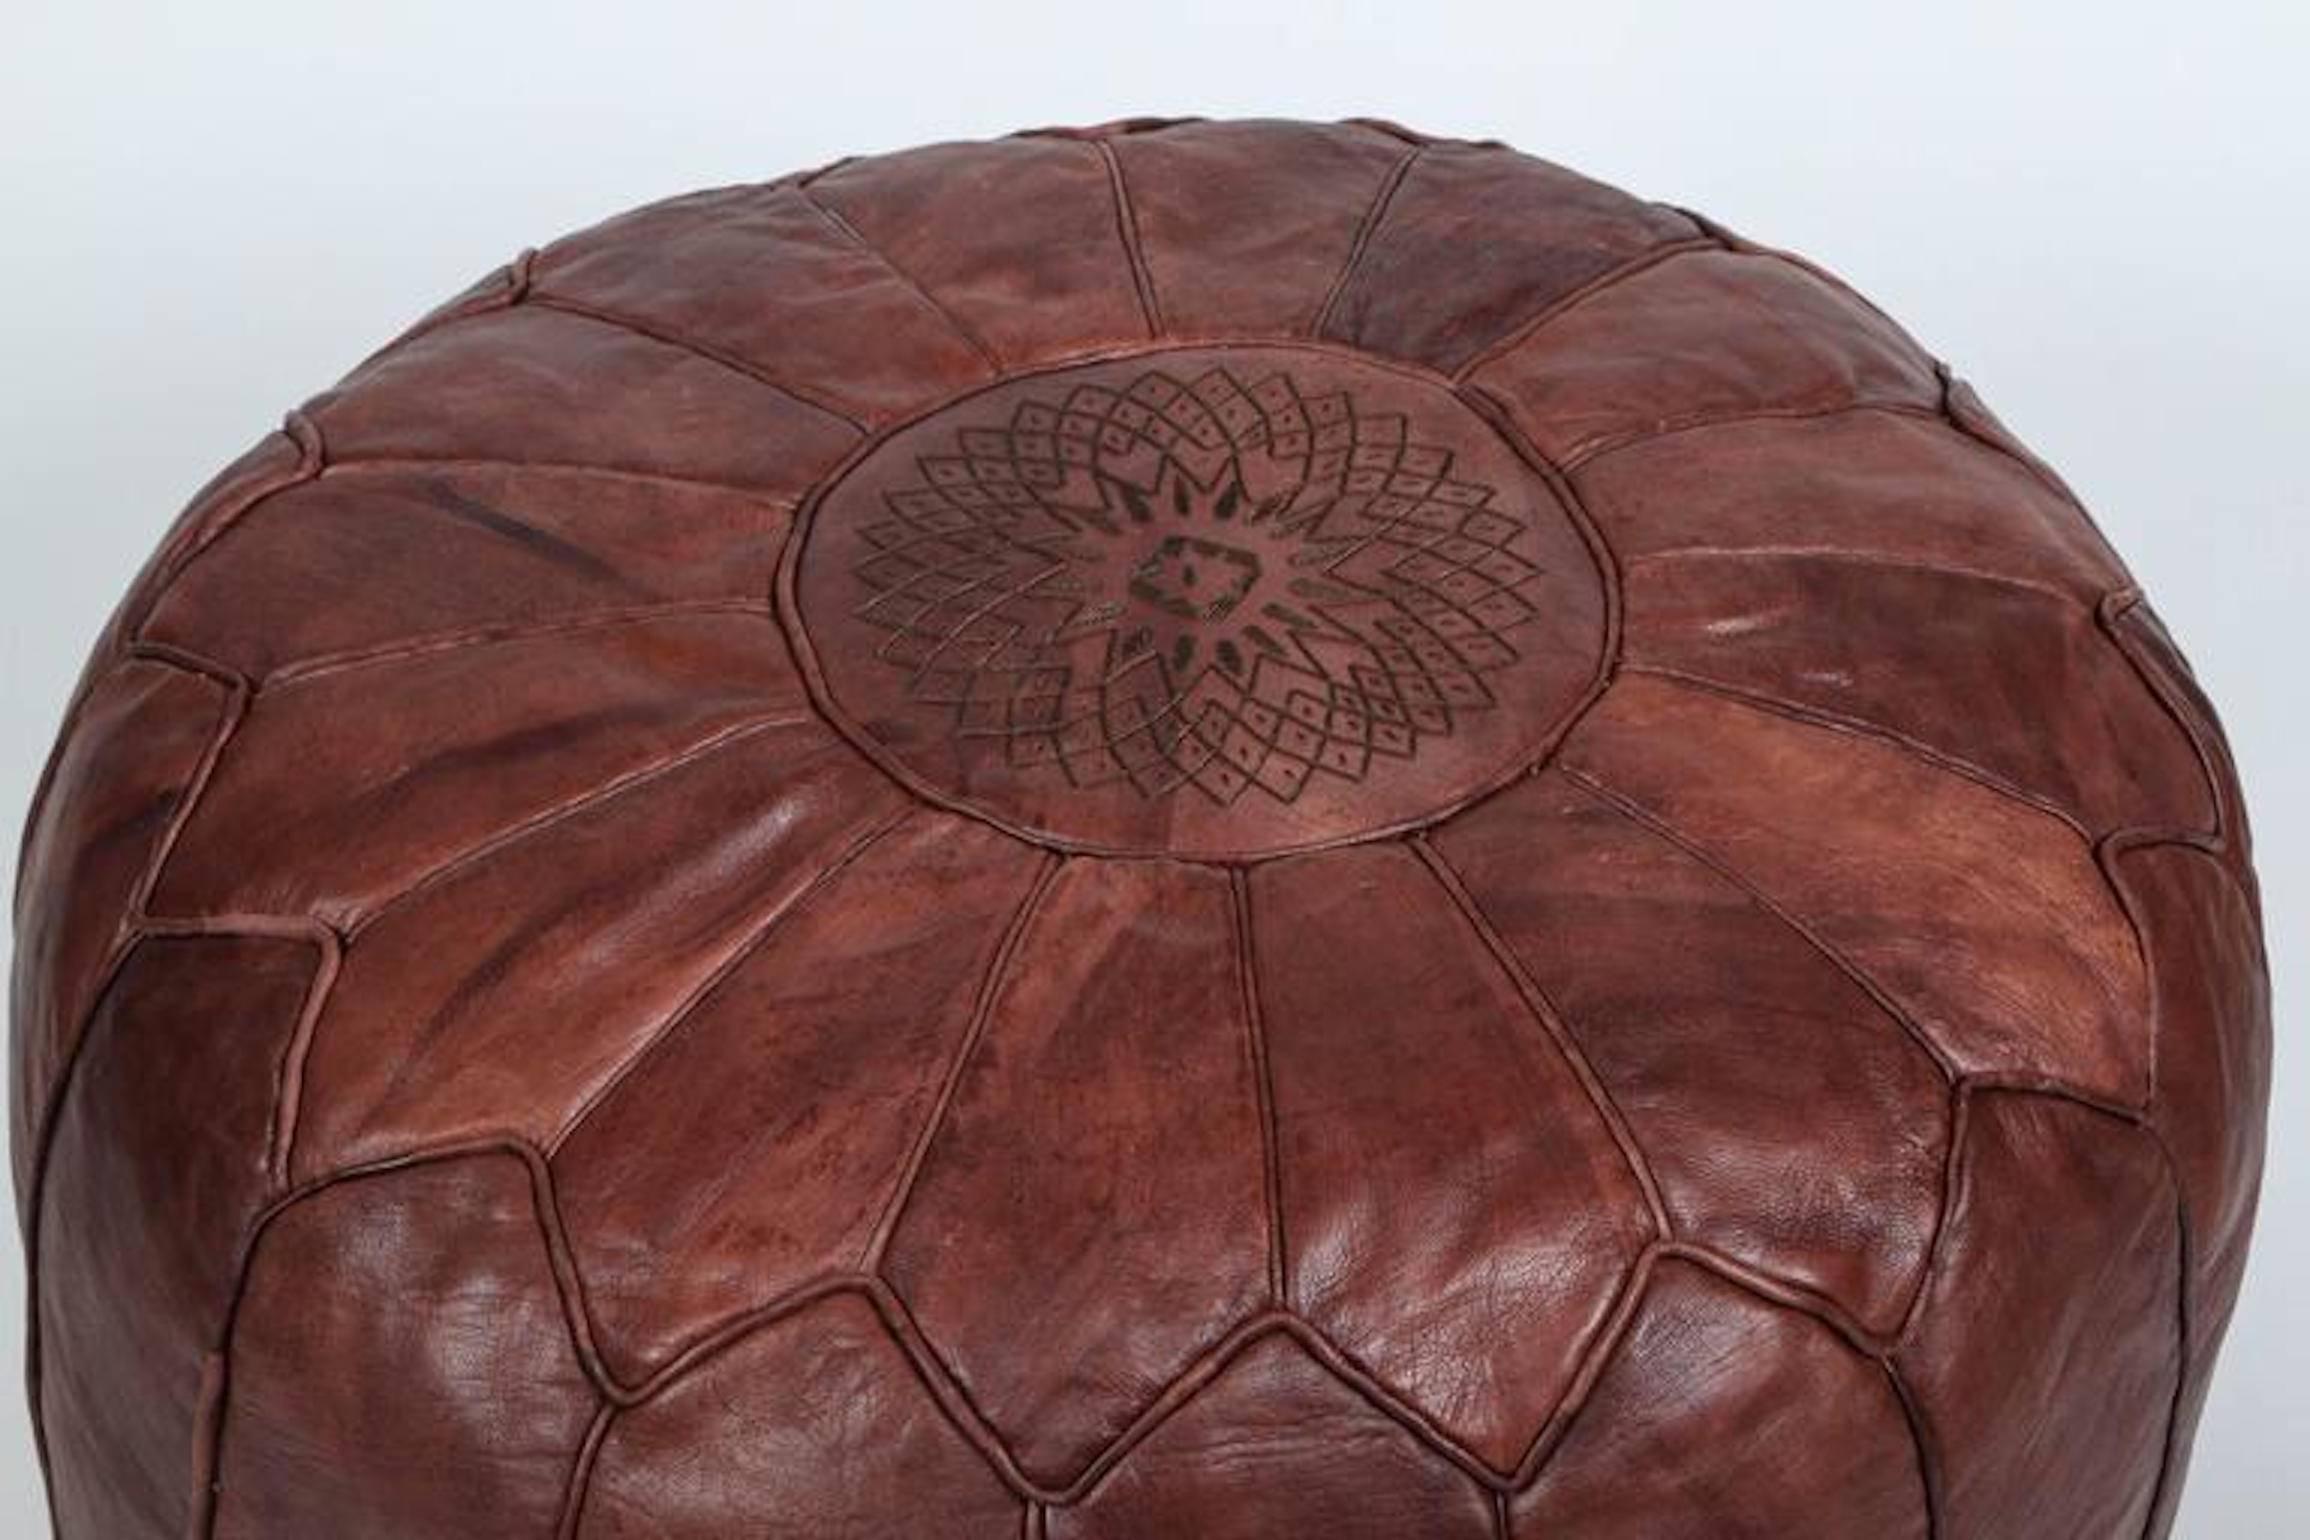 Pair of large vintage round Moroccan leather poufs, handcrafted in dark chocolate brown camel leather.
Hand tooled and embroidered leather stools on the top with the Moorish star by Moroccan artisans in Marrakech.
Nice patina.
Multiple available